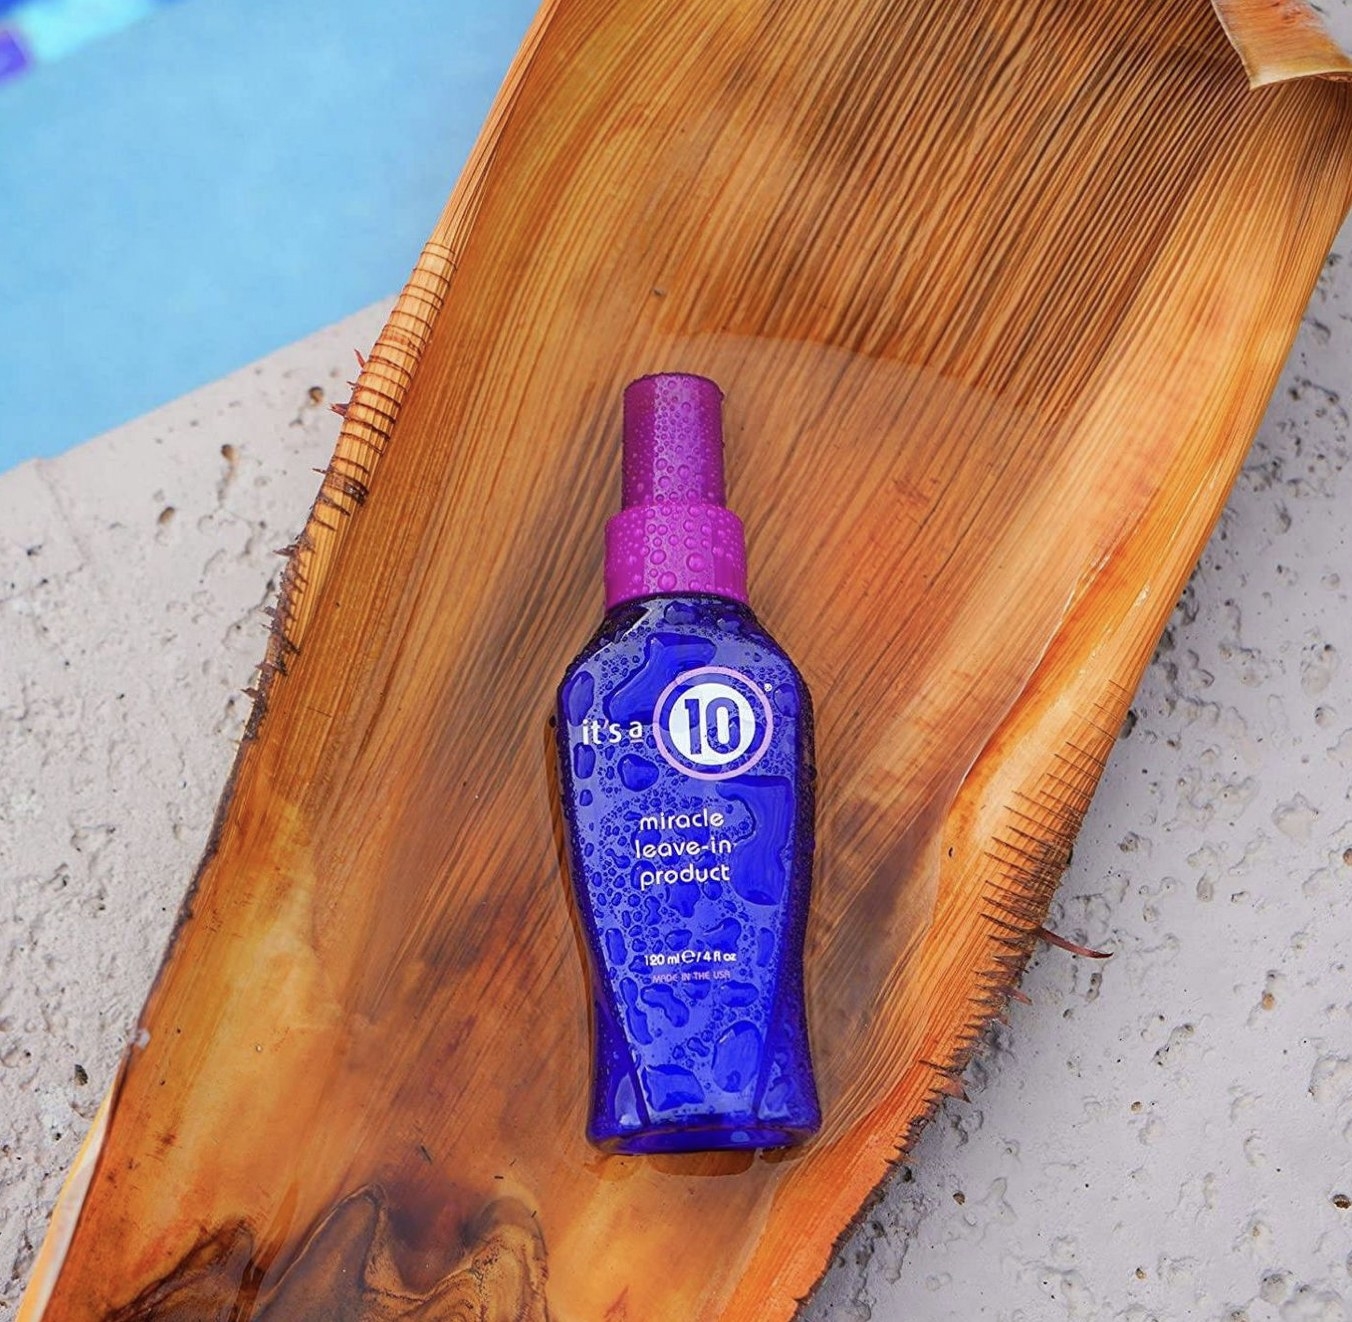 A blue bottle of leave-in hair product